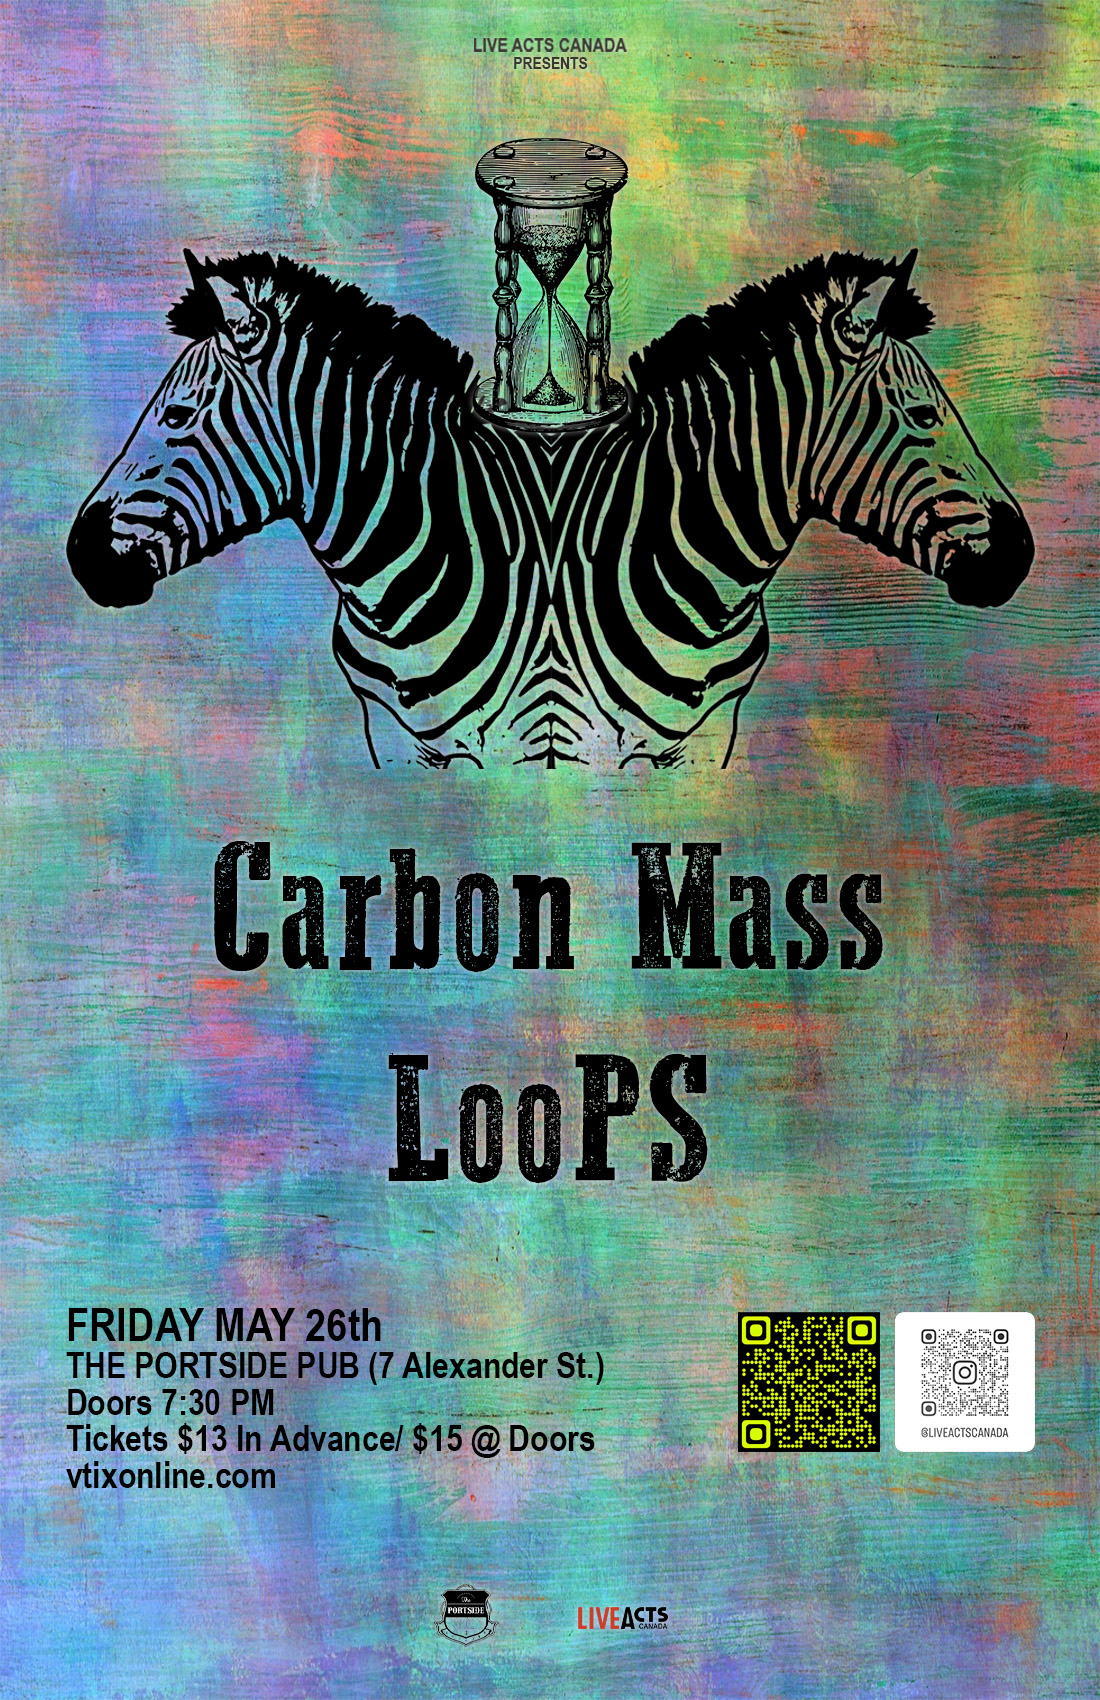 Carbon Mass with Special Guest LooPS